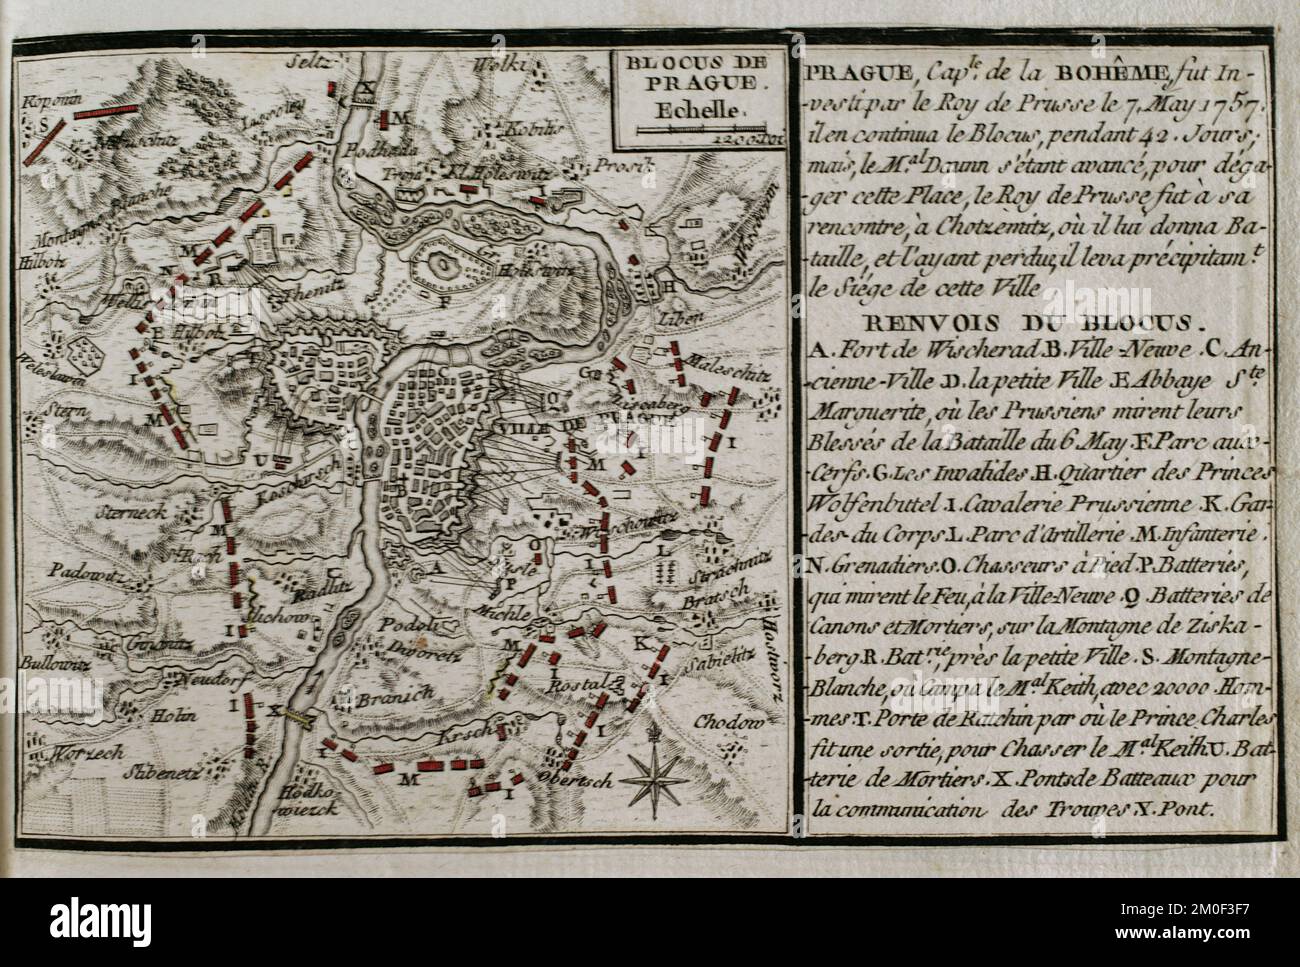 Seven Years War (1756-1763). Map of the blockade of Prussian troops at Prague, 1757. Besieged by the Prussian King Frederick the Great from 7th May 1757. The blockade continued for 42 days. In the meantime, an Austrian army under the command of Marshal Daun marched to the aid of the besieged. Frederick the Great decided to mobilise the Duke of Bevern's army to cut off Daun's army. On 8 June, Kaunitz ordered Daun to start the operation to liberate Prague, and the troops began their advance on 12 June. Published in 1765 by the cartographer Jean de Beaurain (1696-1771) as an illustration of his G Stock Photo